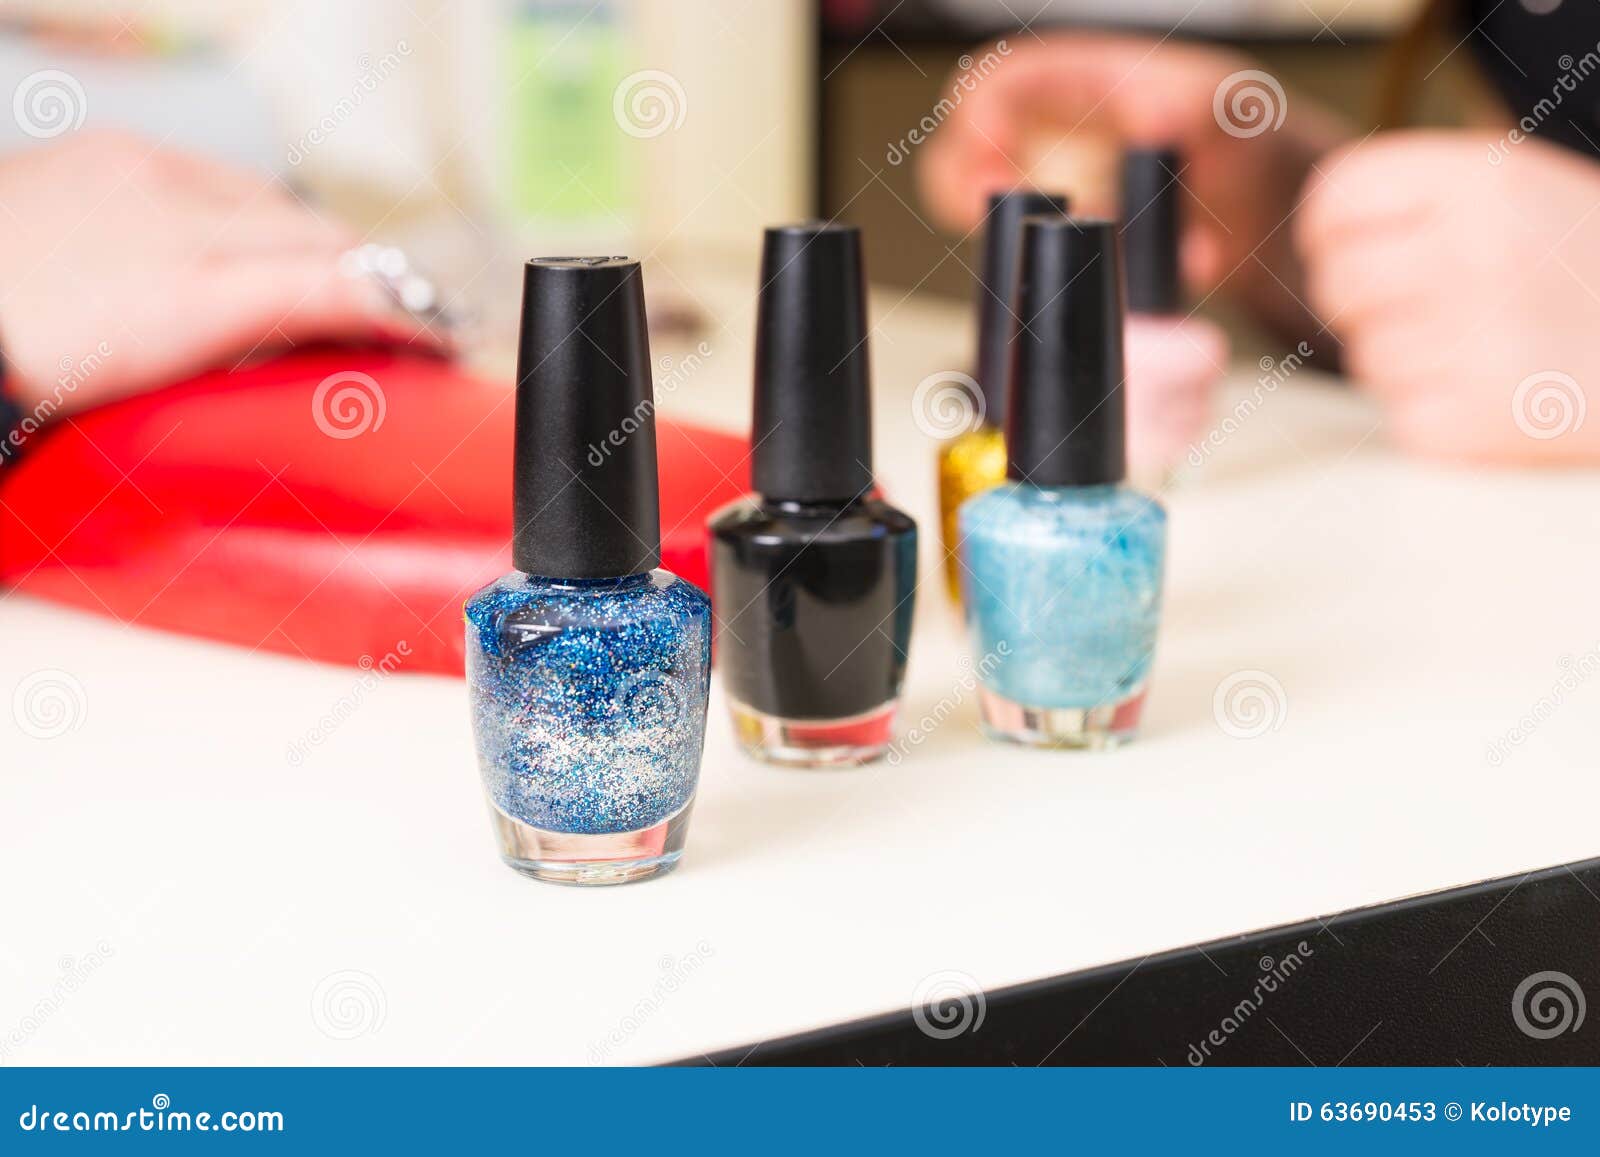 Nail polish stock image. Image of faddy, copy, color, colorful - 5266353